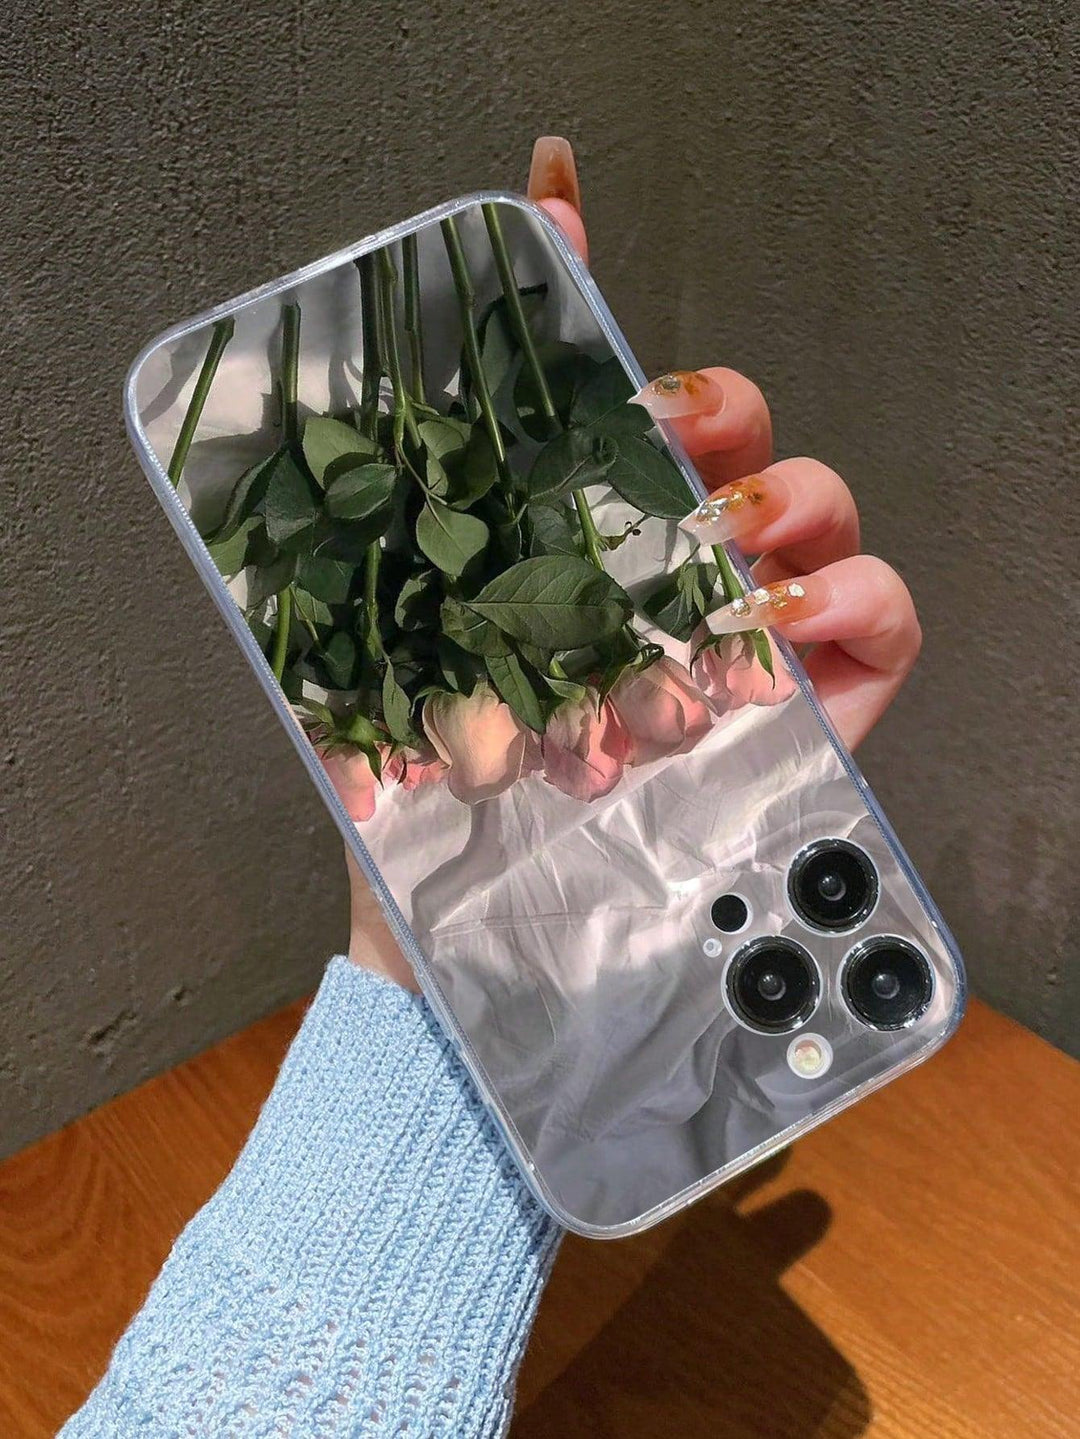 Floral Clear Phone Case - Brand My Case